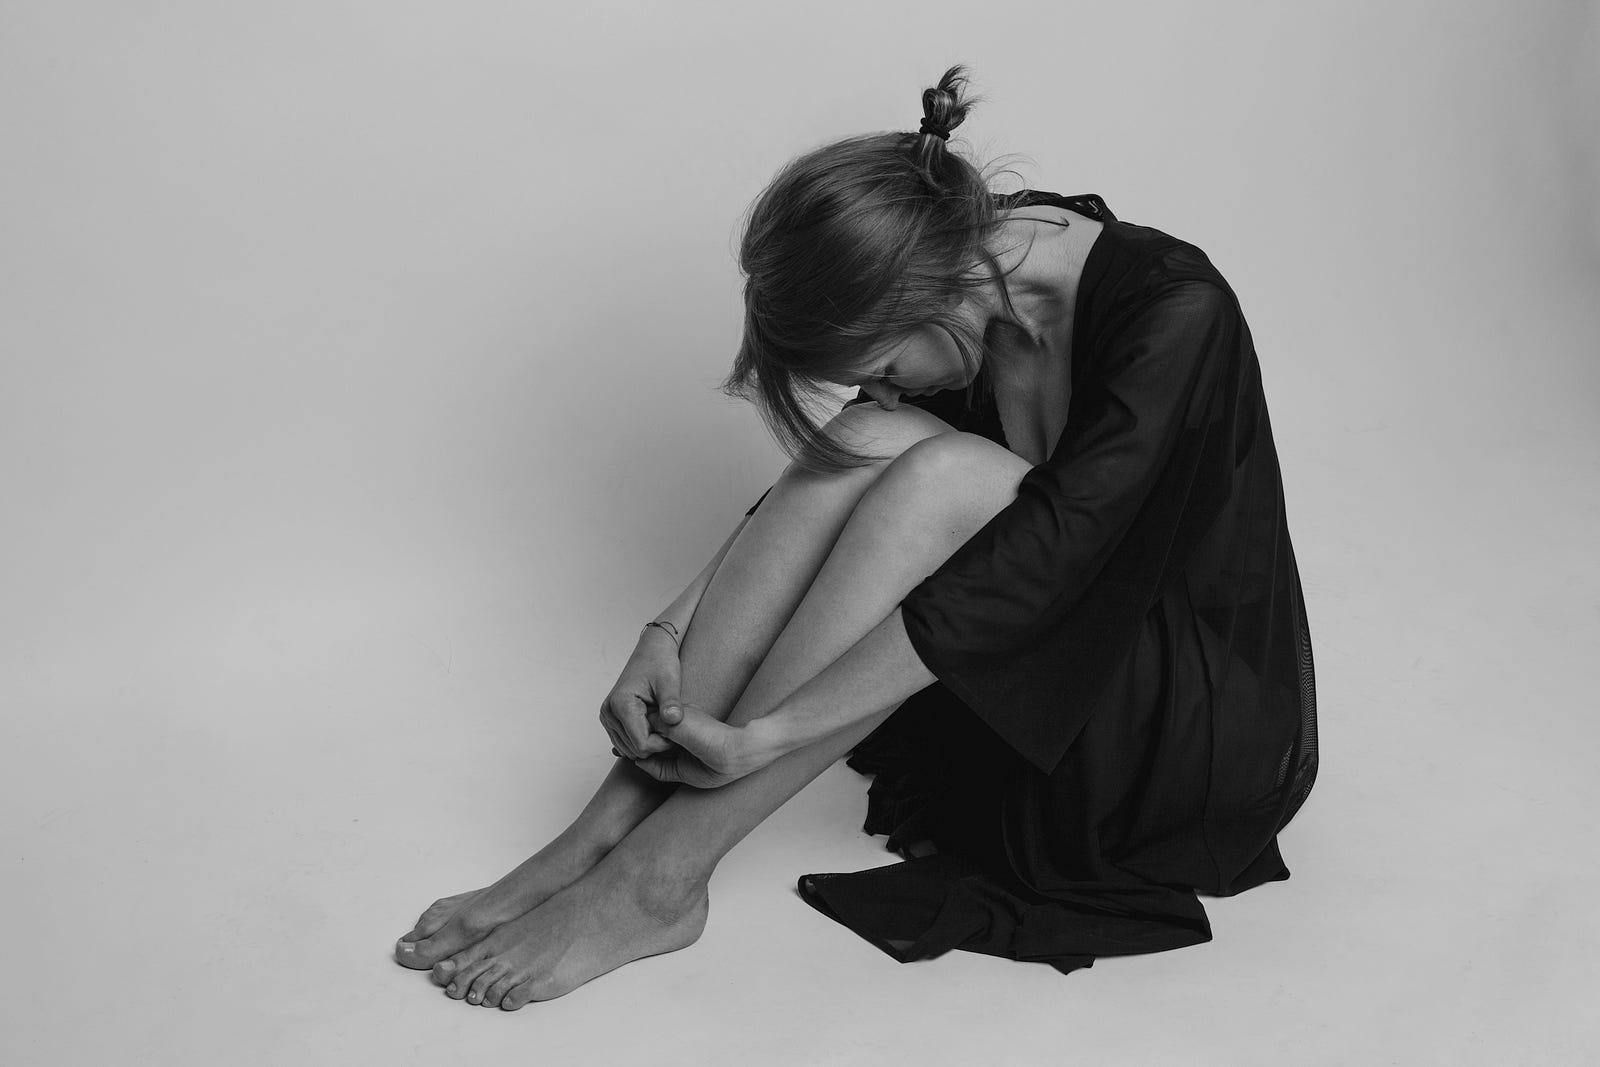 A young woman sits on the floor, legs together and her head bent down to her legs. Major depression affects individuals from all walks of life, irrespective of age, gender, socioeconomic status, or cultural background. It is not limited to a specific demographic group and can occur in children, adolescents, adults, and older adults.